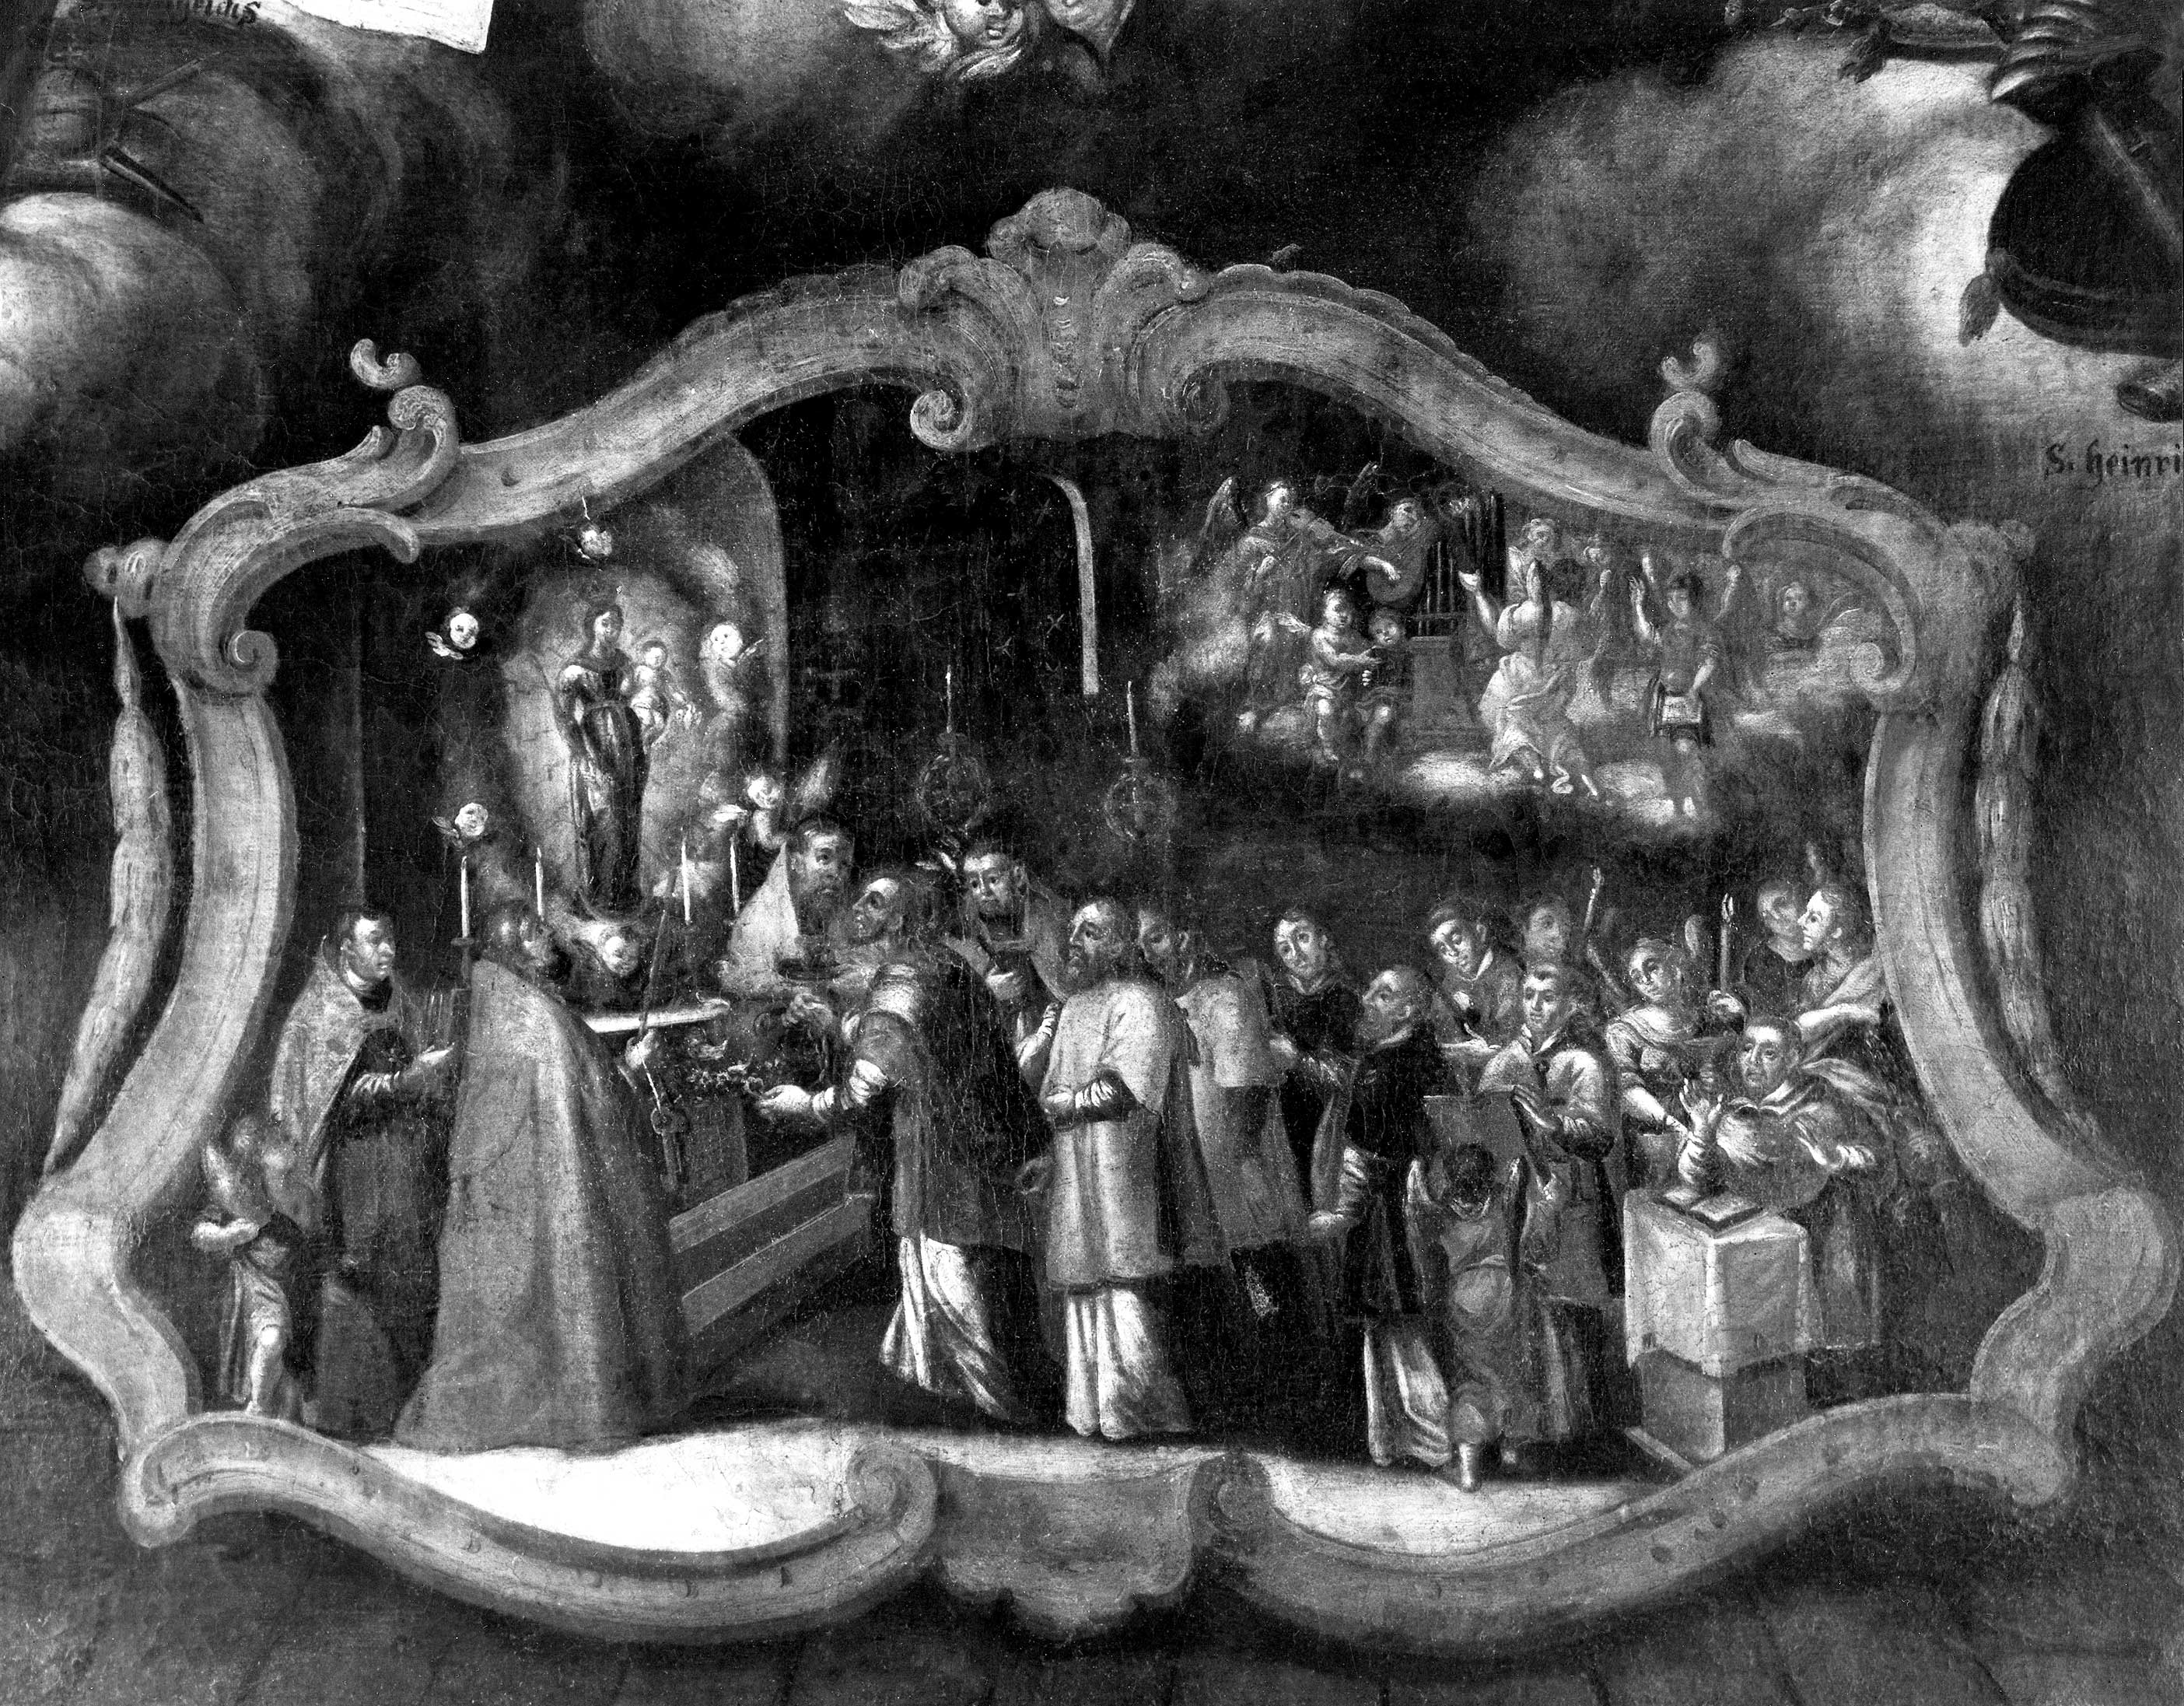 Detail of the lower section of a religious painting, which depicts the celebration of the Mass at a small altar.